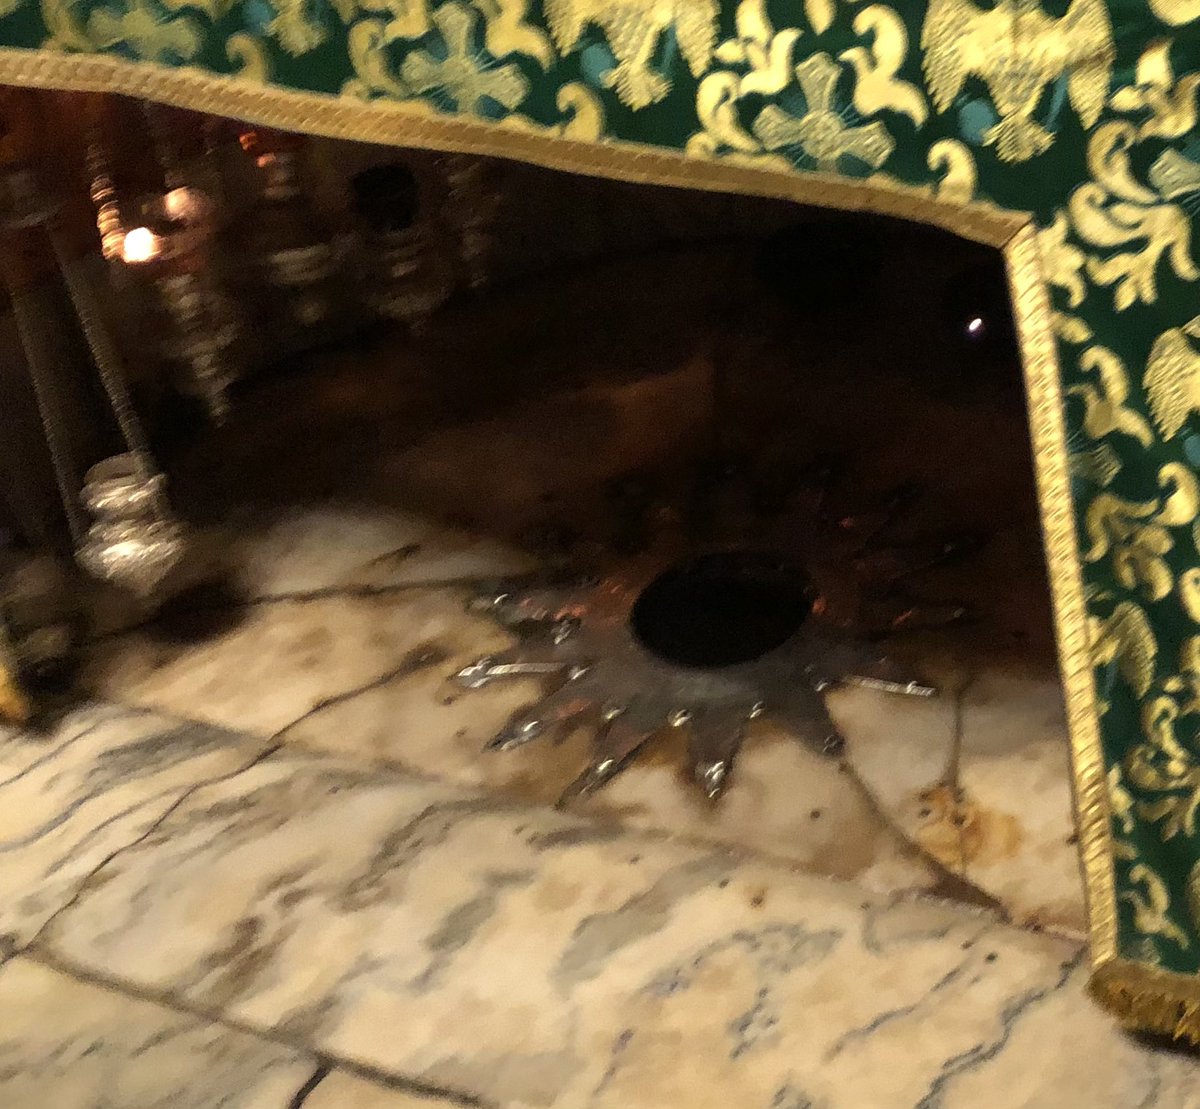 Today, I started the Solemnity of the Sacred Heart by celebrating Mass at the Basilica of the Holy Nativity! #HolyLand